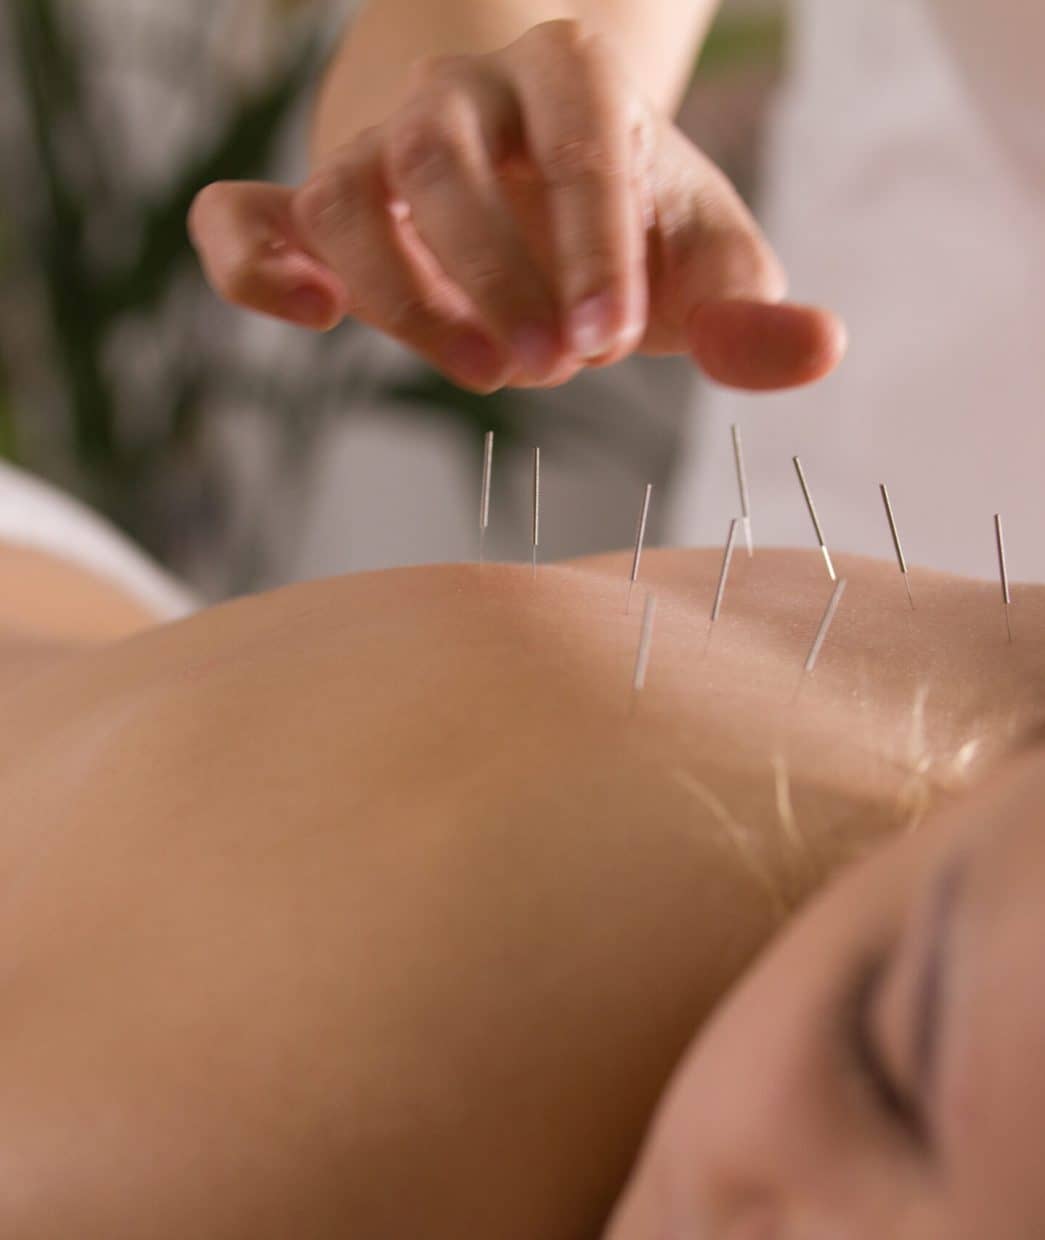 The doctor sticks needles into thegirl's body on the acupuncture, close-up